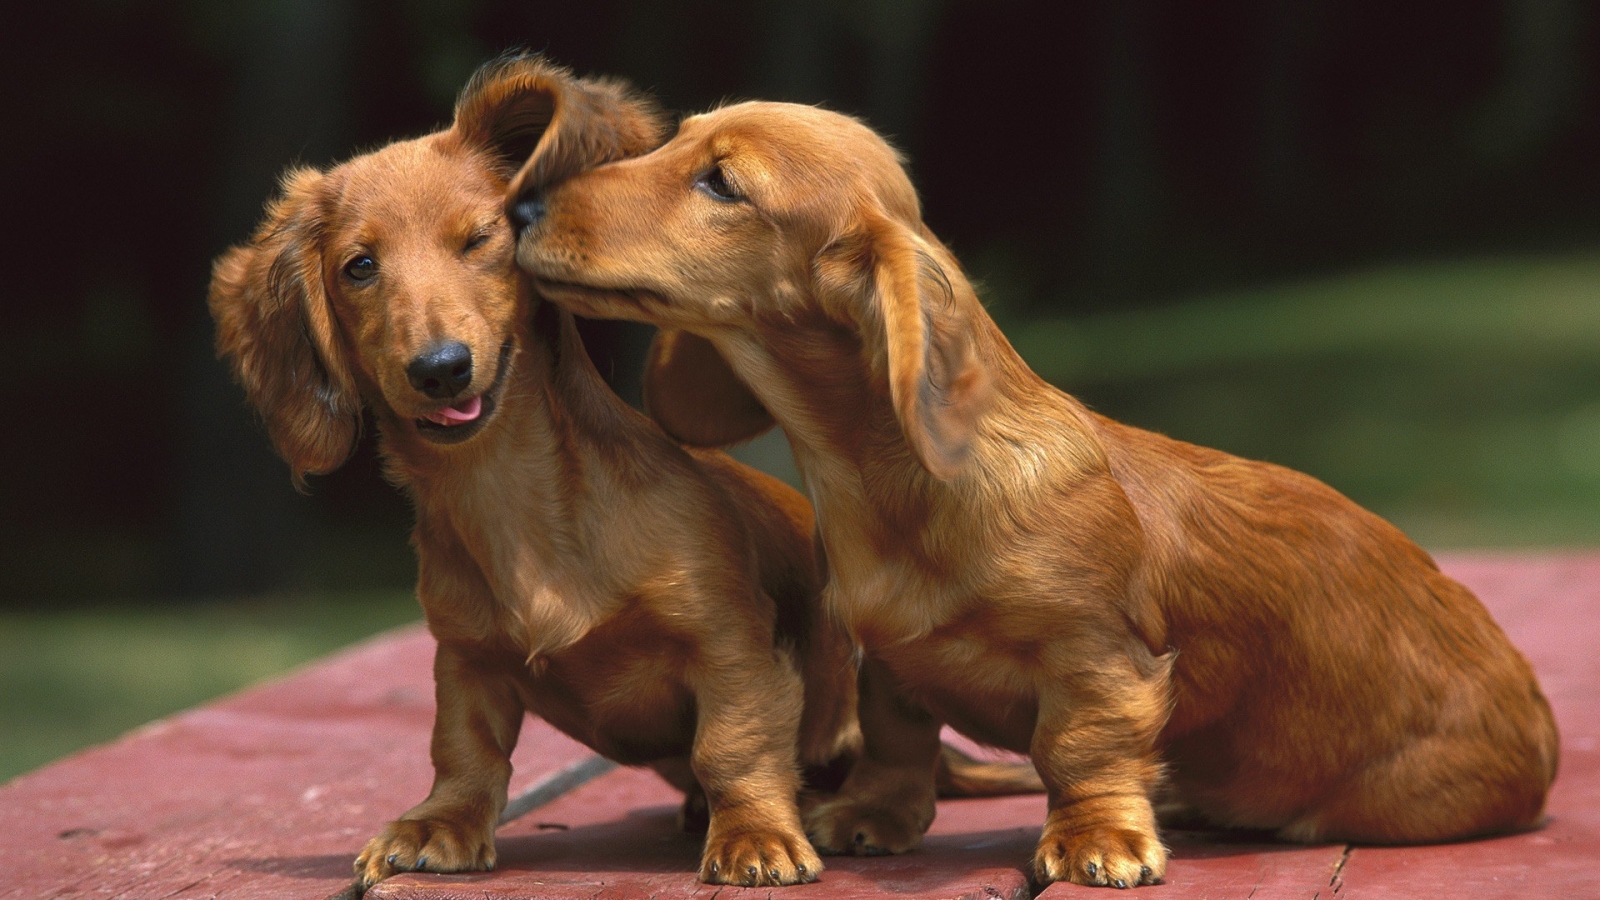 Dogs Photo And Wallpaper Beautiful Dachshund Pictures